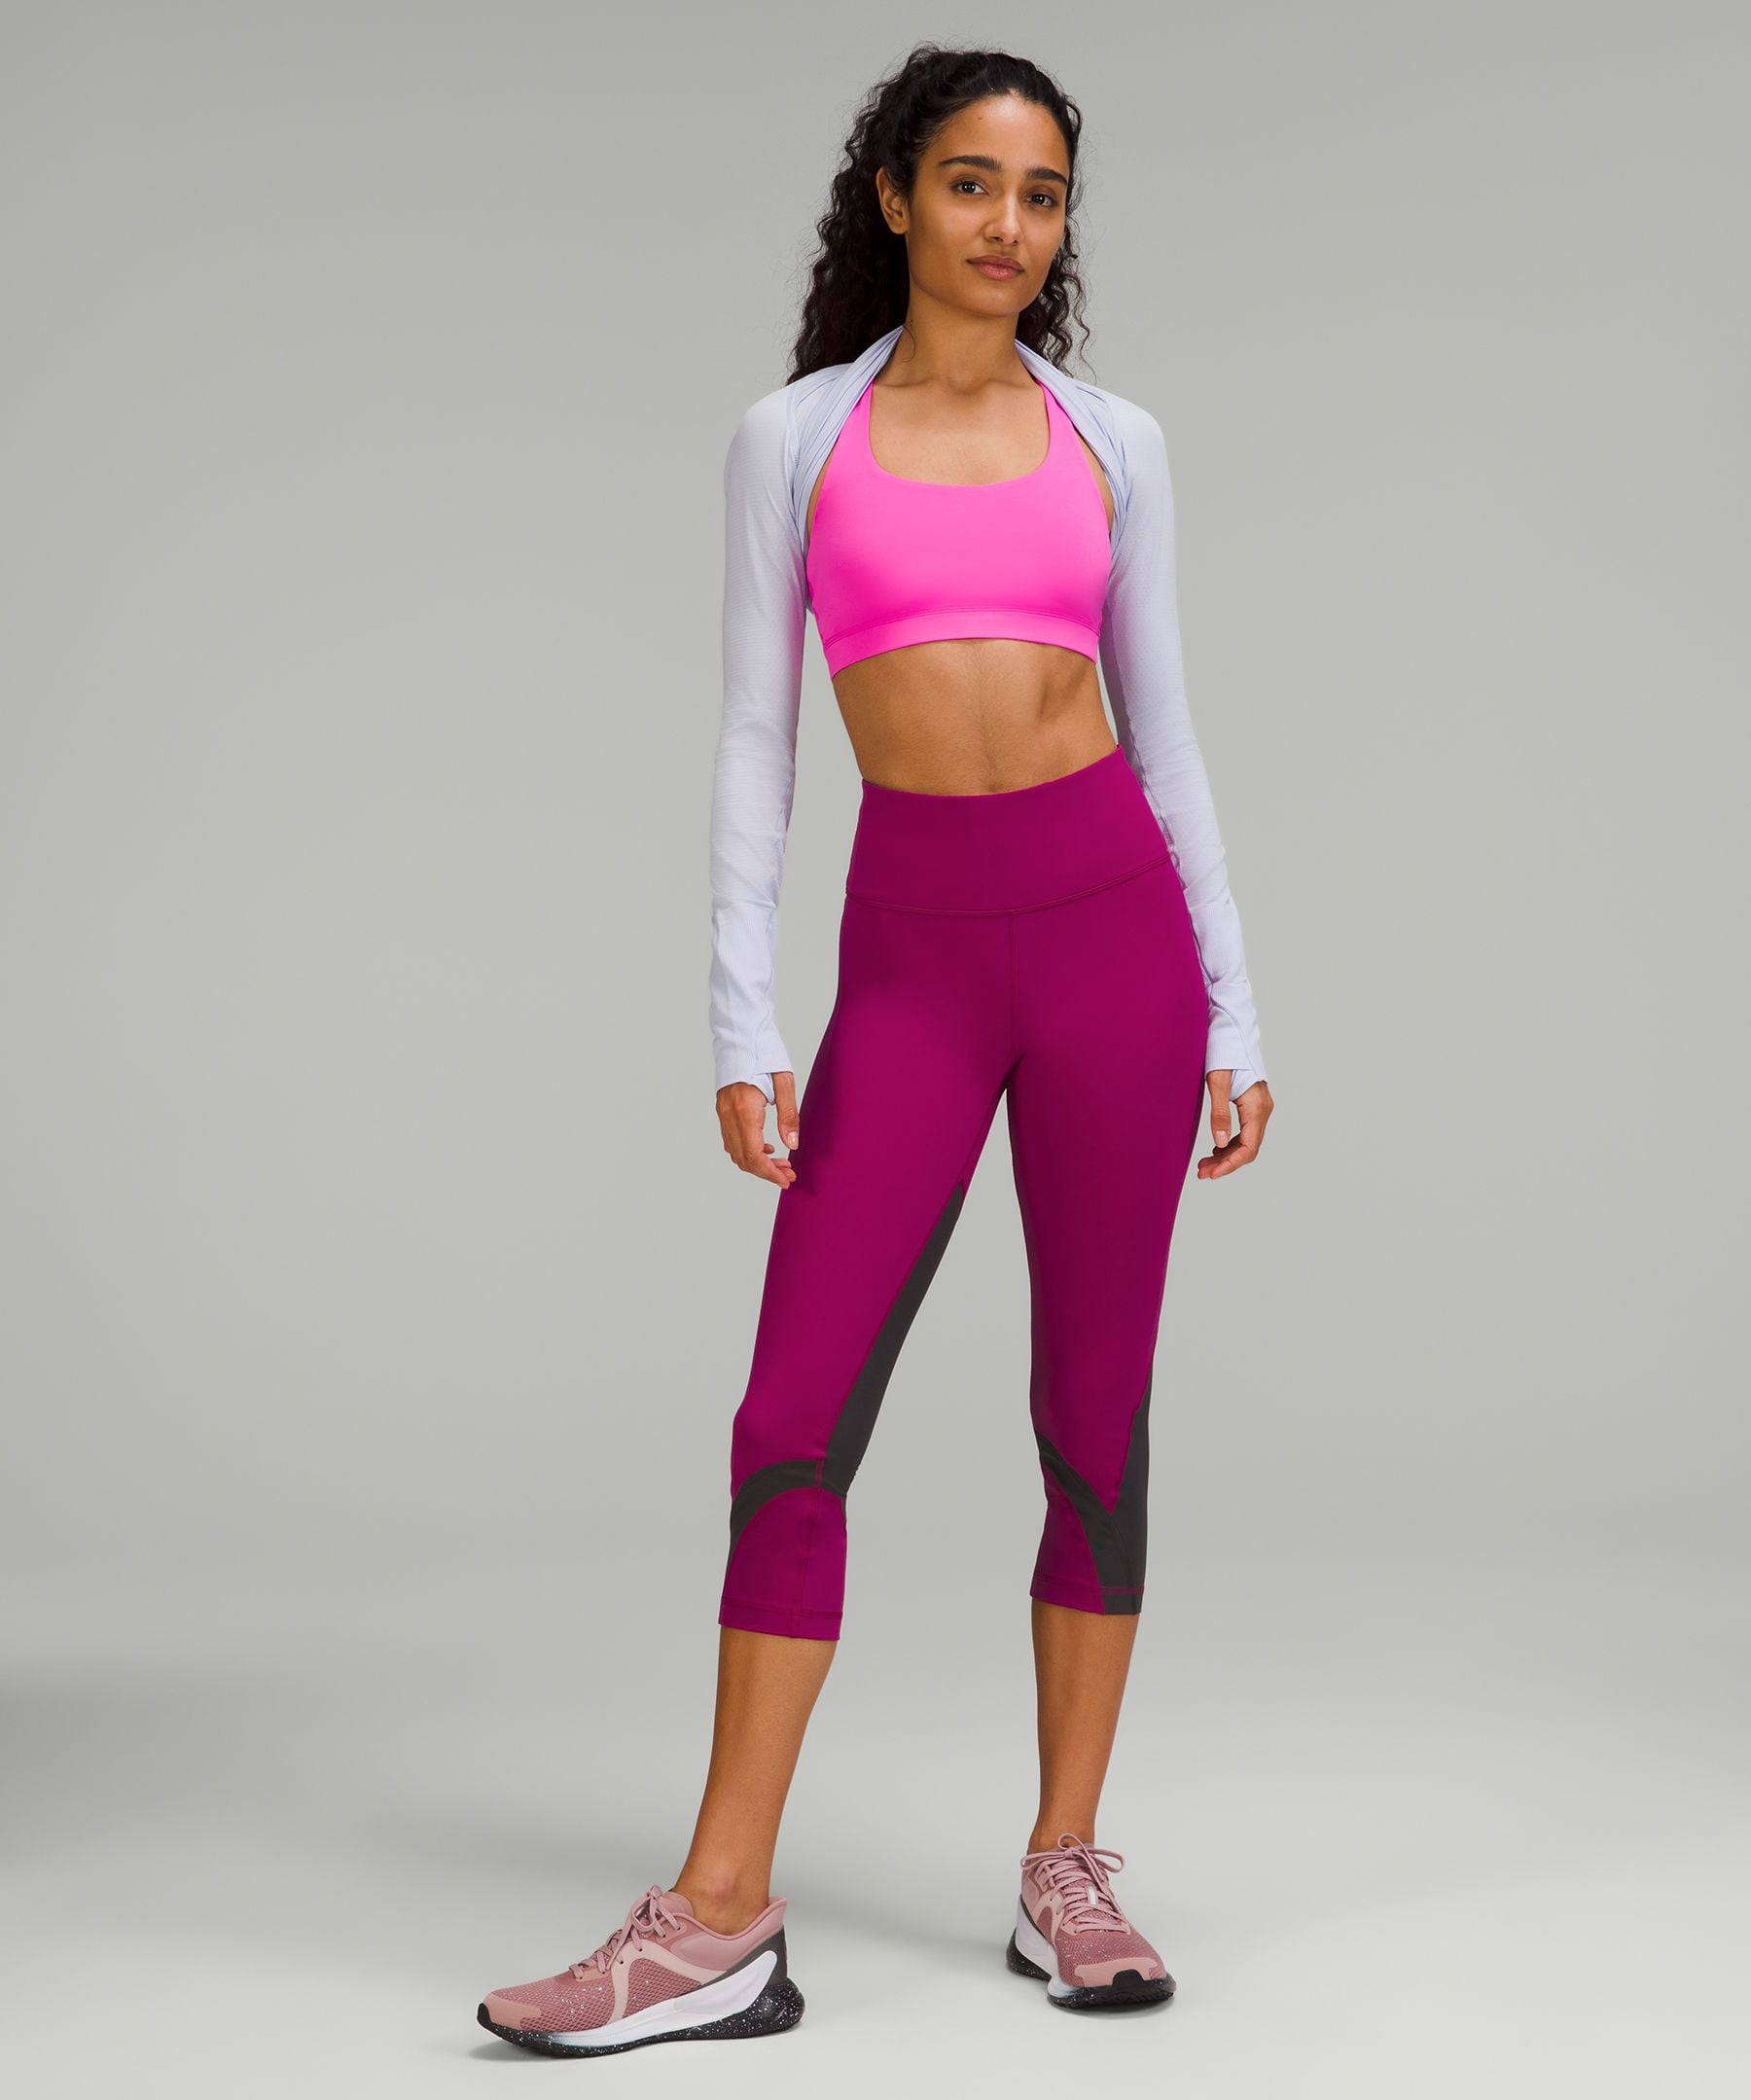 Cropped Colorblocked Leggings: Lululemon Throwback Inspire High-Rise Crop, Lululemon's Throwback Collection Is a Nod to the Brand's Early Bestsellers